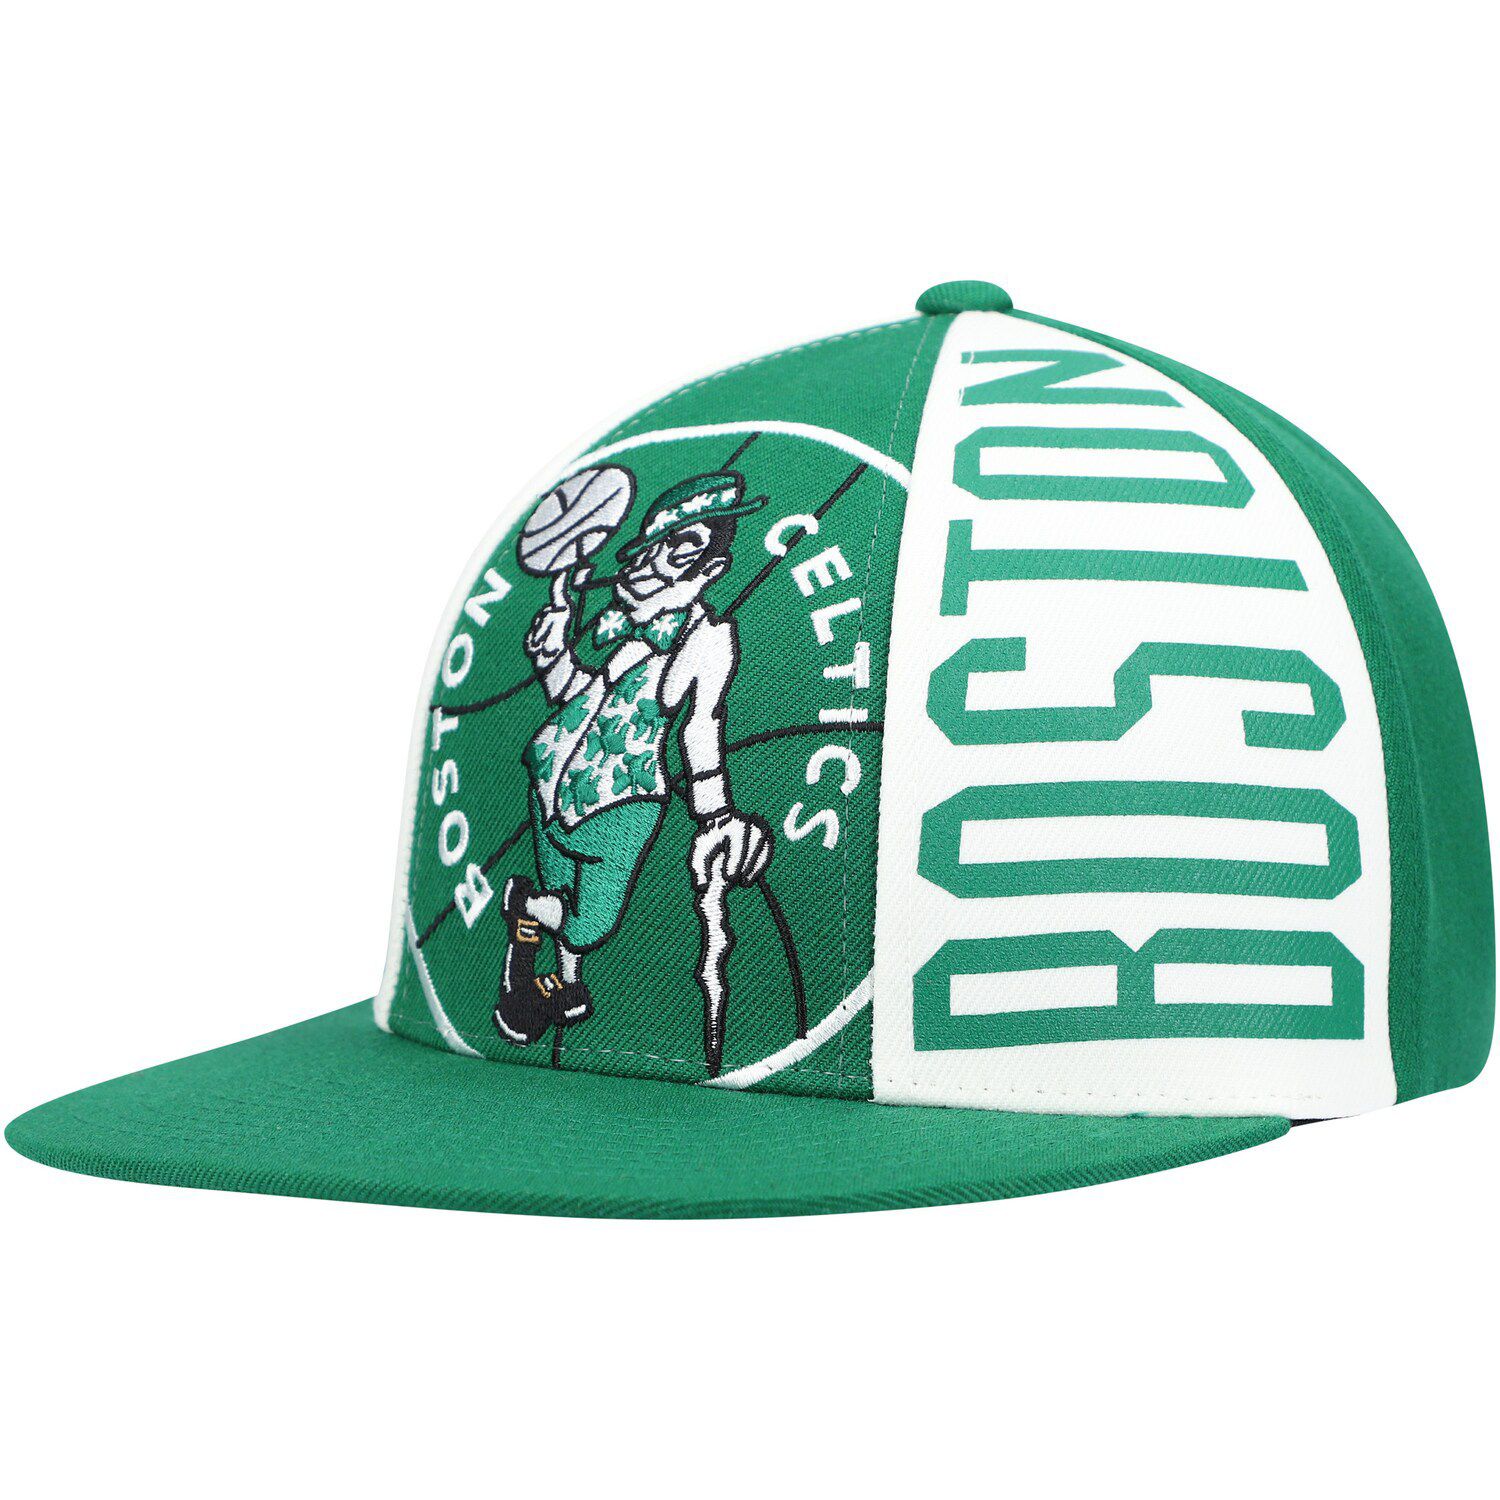 Image for Unbranded Men's Mitchell & Ness Kelly Green Boston Celtics Hardwood Classics Big Face Callout Snapback Hat at Kohl's.